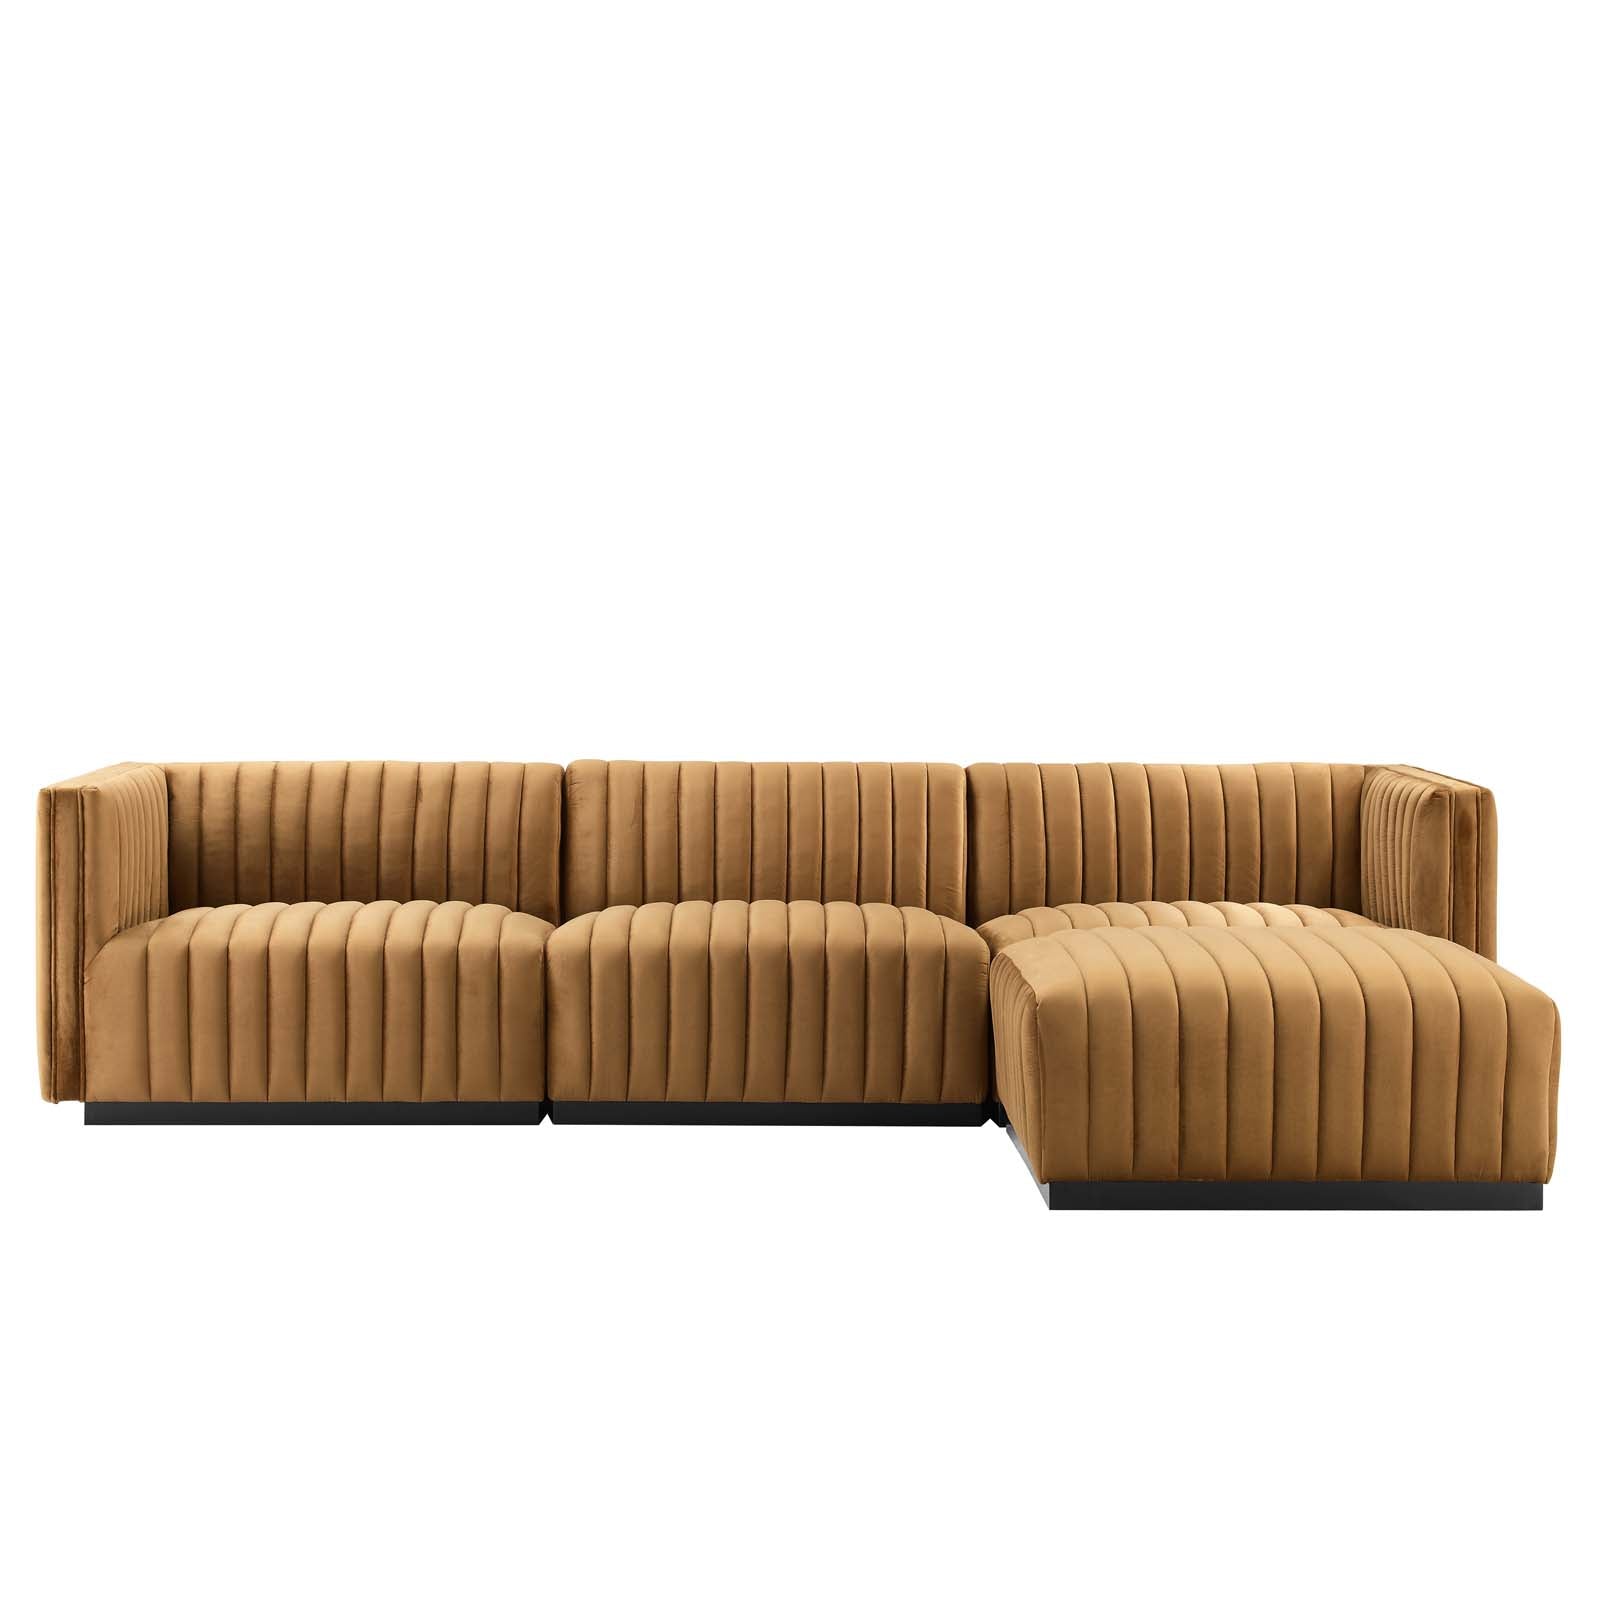 Conjure Channel Tufted Performance Velvet 4-Piece Sectional - East Shore Modern Home Furnishings